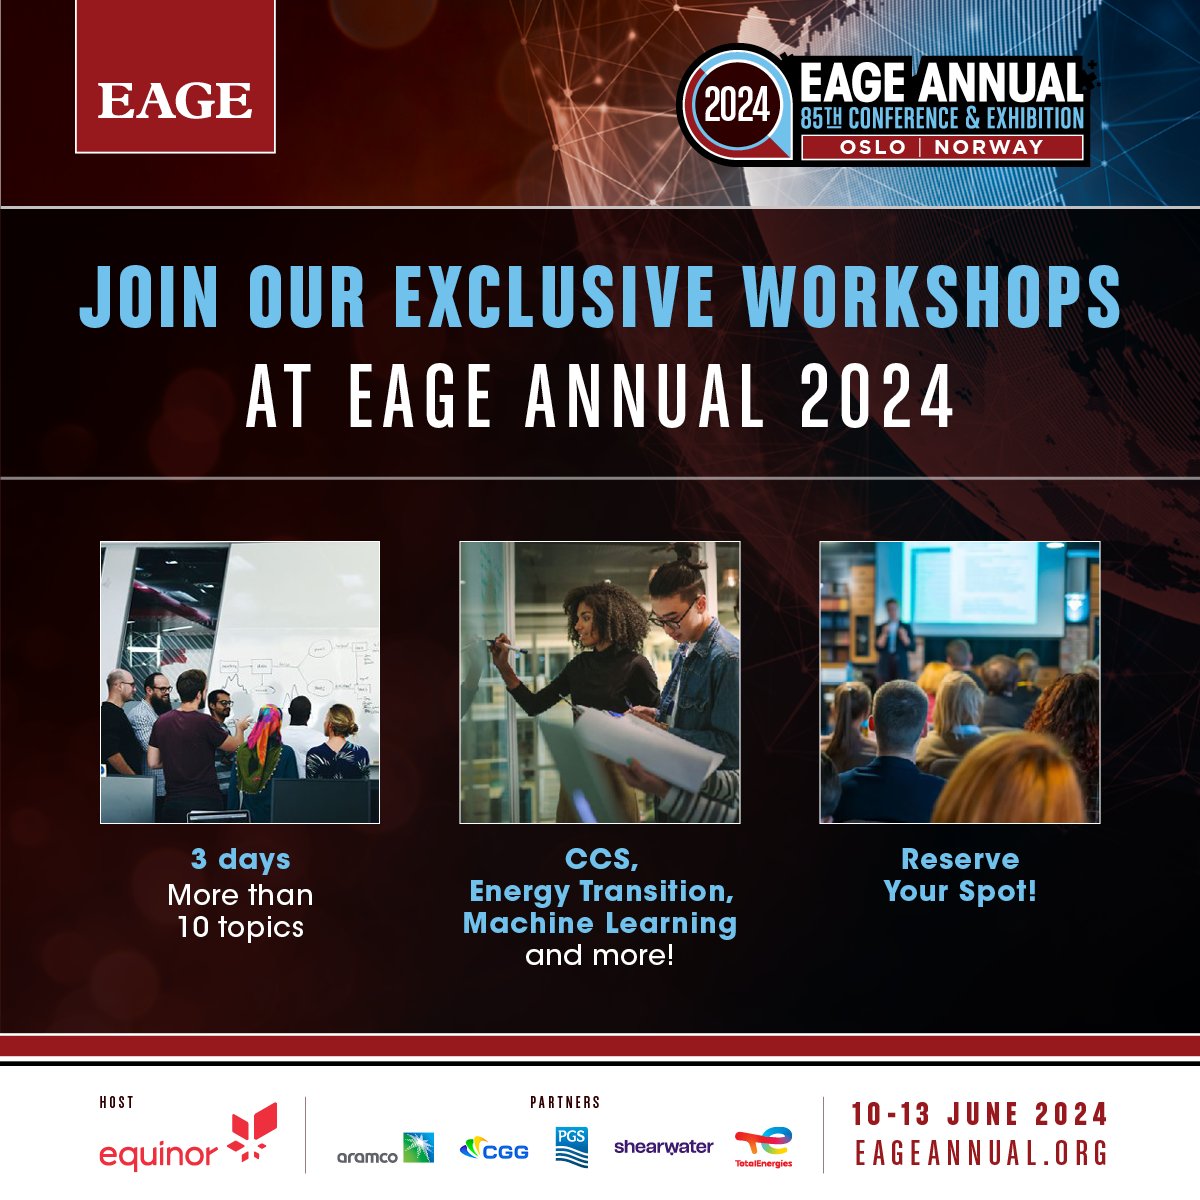 Dive into the future of energy at the 85th EAGE Conference in Oslo, June 10-13, 2024! From CCS to Energy Transition and AI, our workshops are your gateway to advancing in the industry. Details & topics here: bit.ly/4an6Jf7